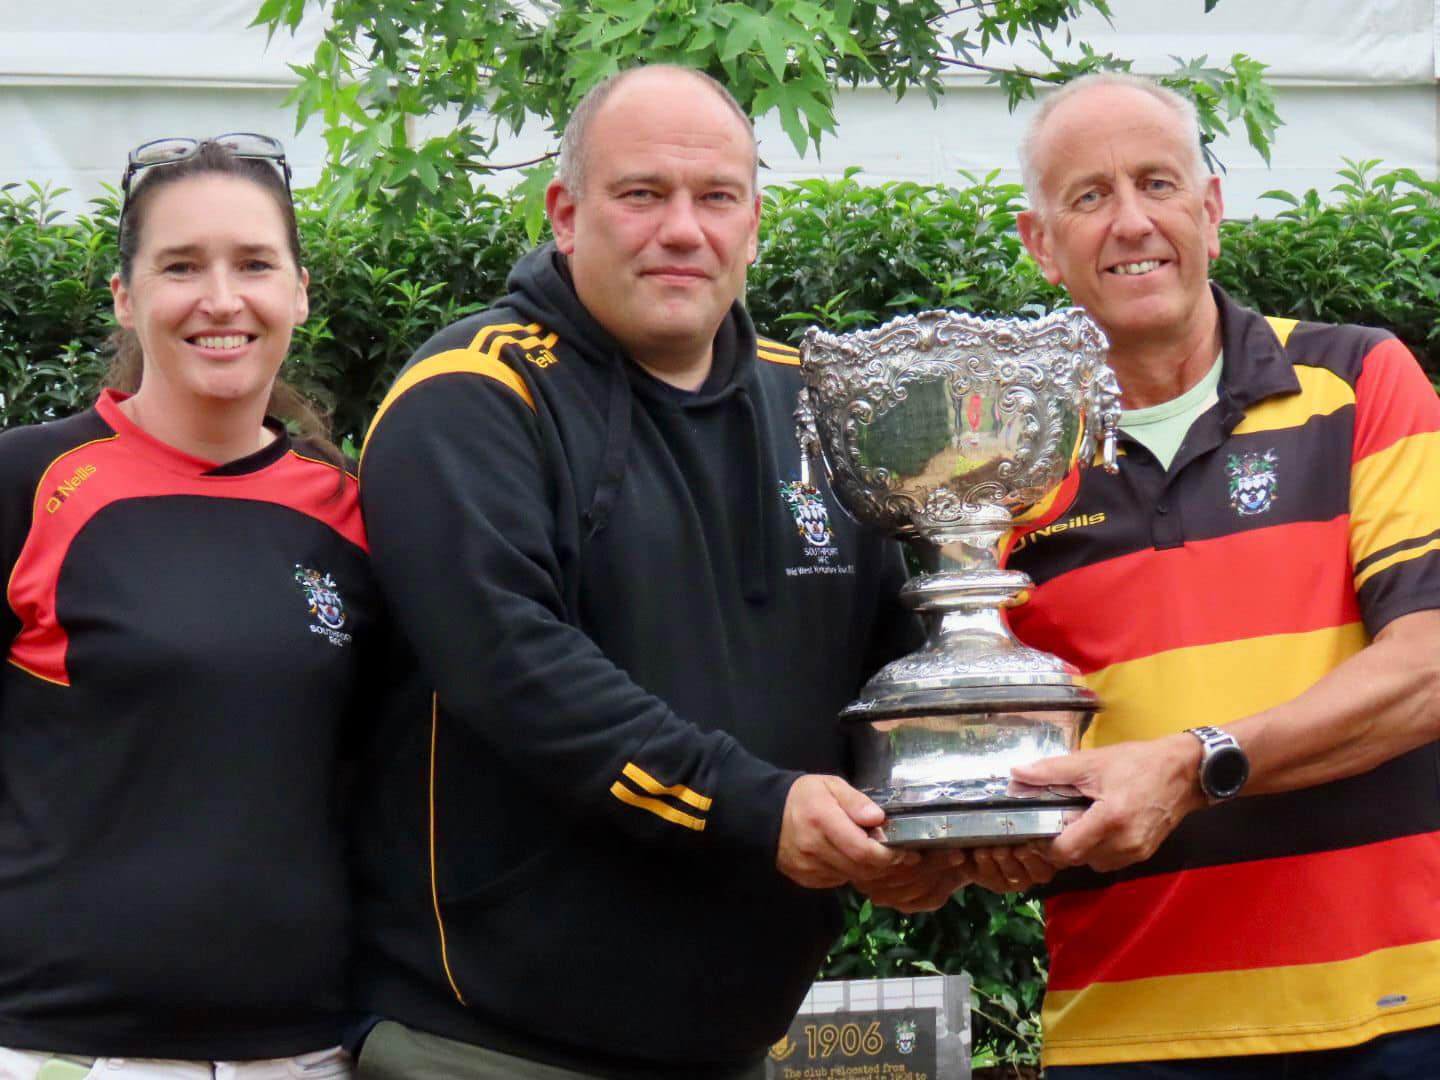 Southport Rugby Club display their trophy at Southport Flower Show. Photo by Andrew Brown Media